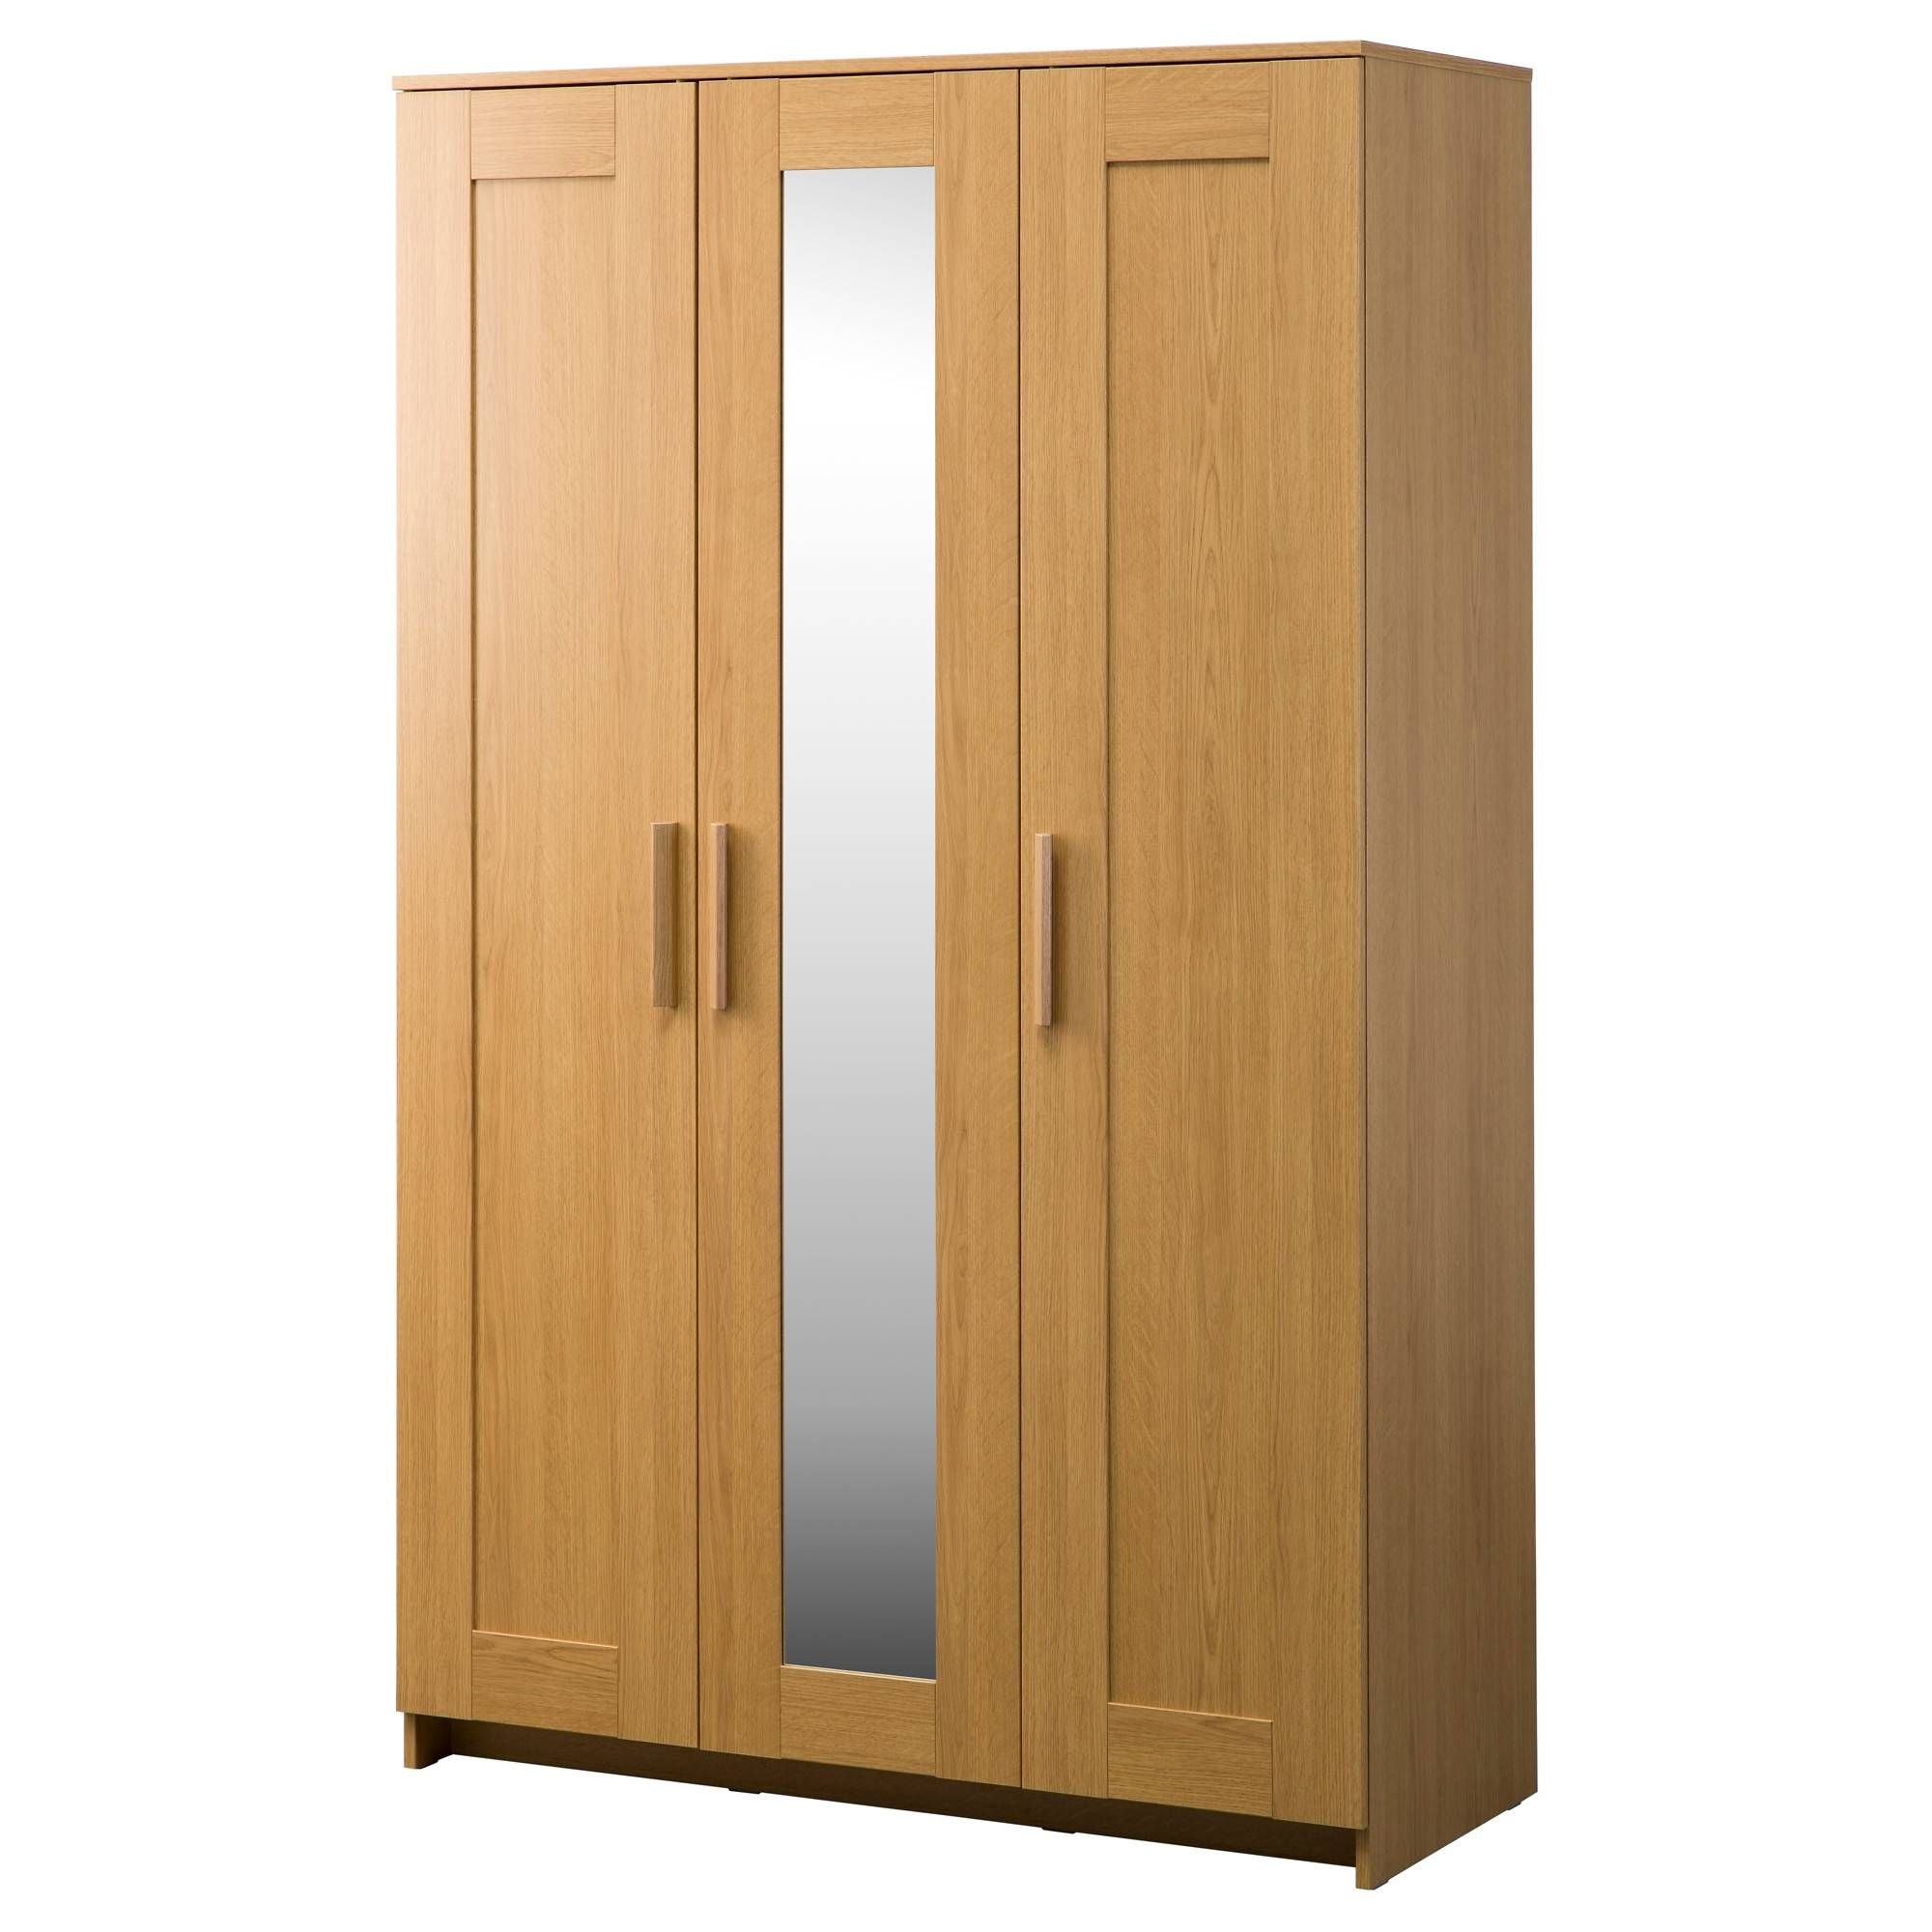 Wardrobes | Ikea Intended For Cheap Wooden Wardrobes (View 1 of 15)